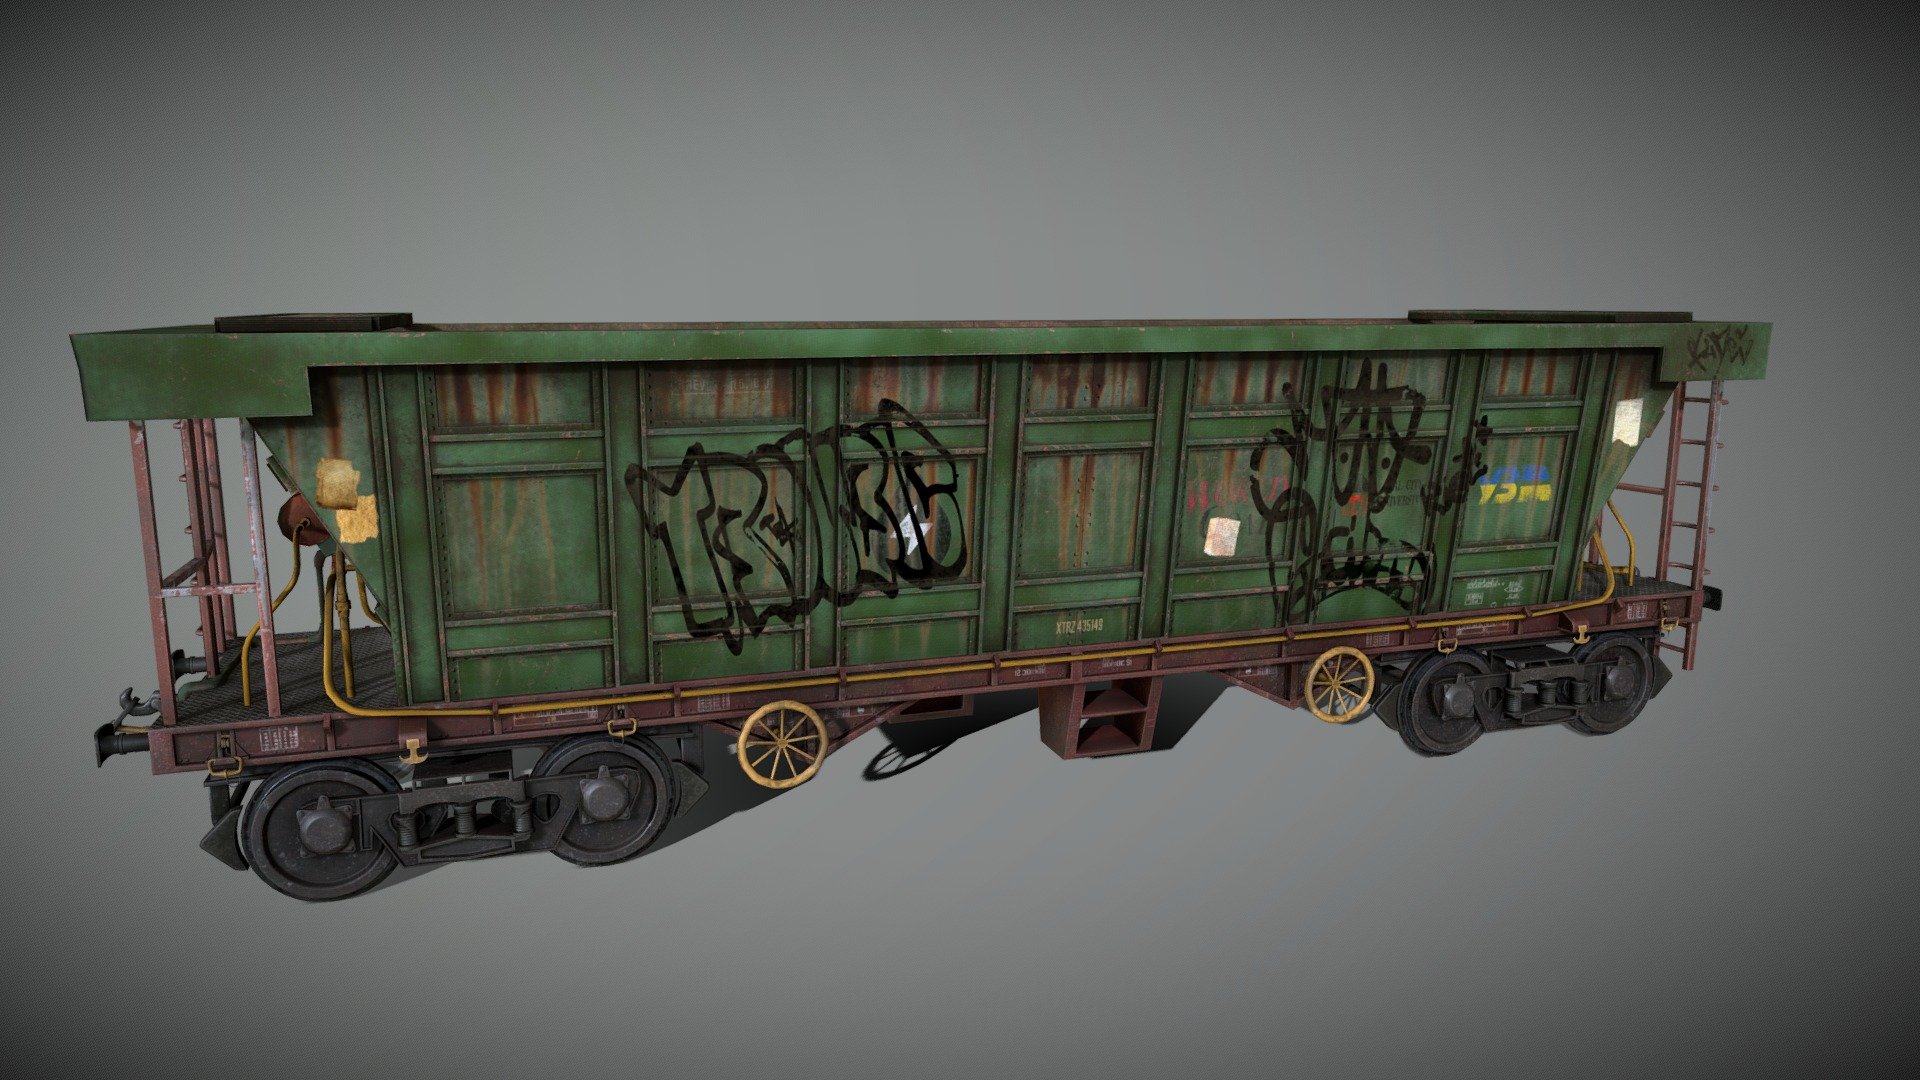 Game ready mesh and textures for the railwy carriage
Model has 21990 polygons, 22969 vertices and 41589 triangles in 3 uv sets.
Model has all needed maps (albedo, opasity, metallic, normal, roughness, )
High quality, low poly model. The normals are baked from high poly models for increased details while using less space.
Modeled in blender, textured in substance painter 3d model